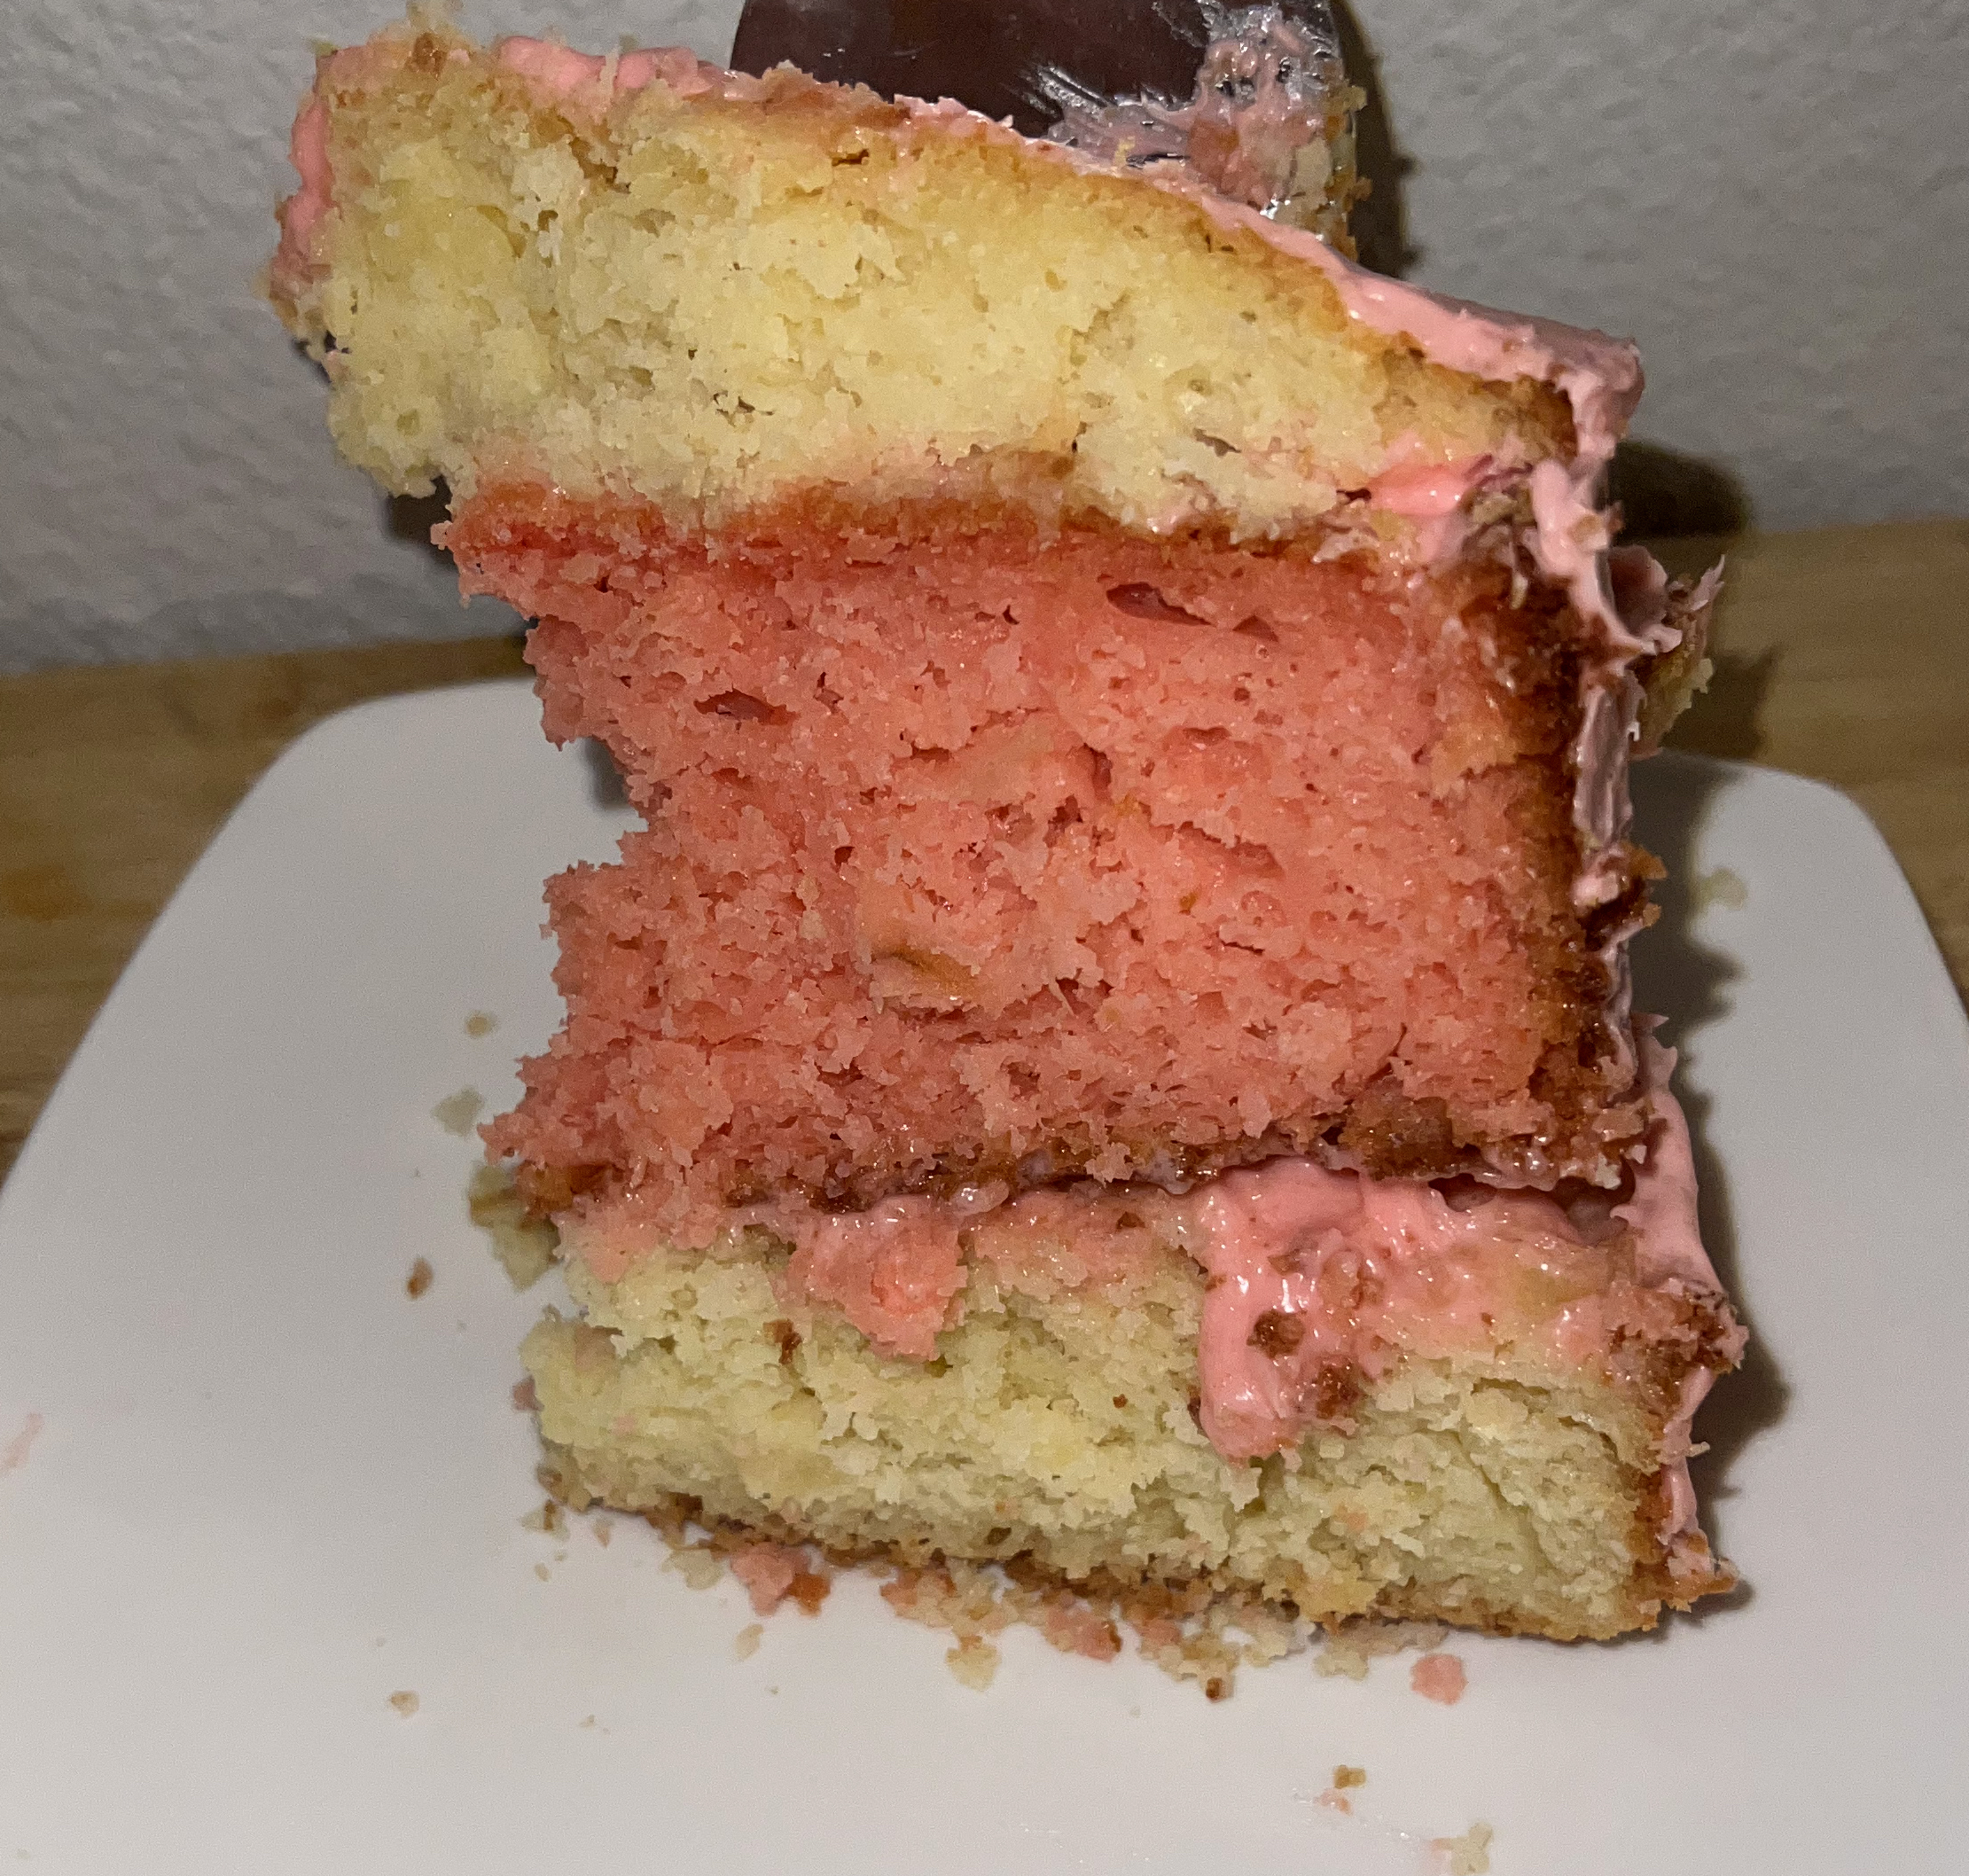 A picture of a piece of cake representing this recipe